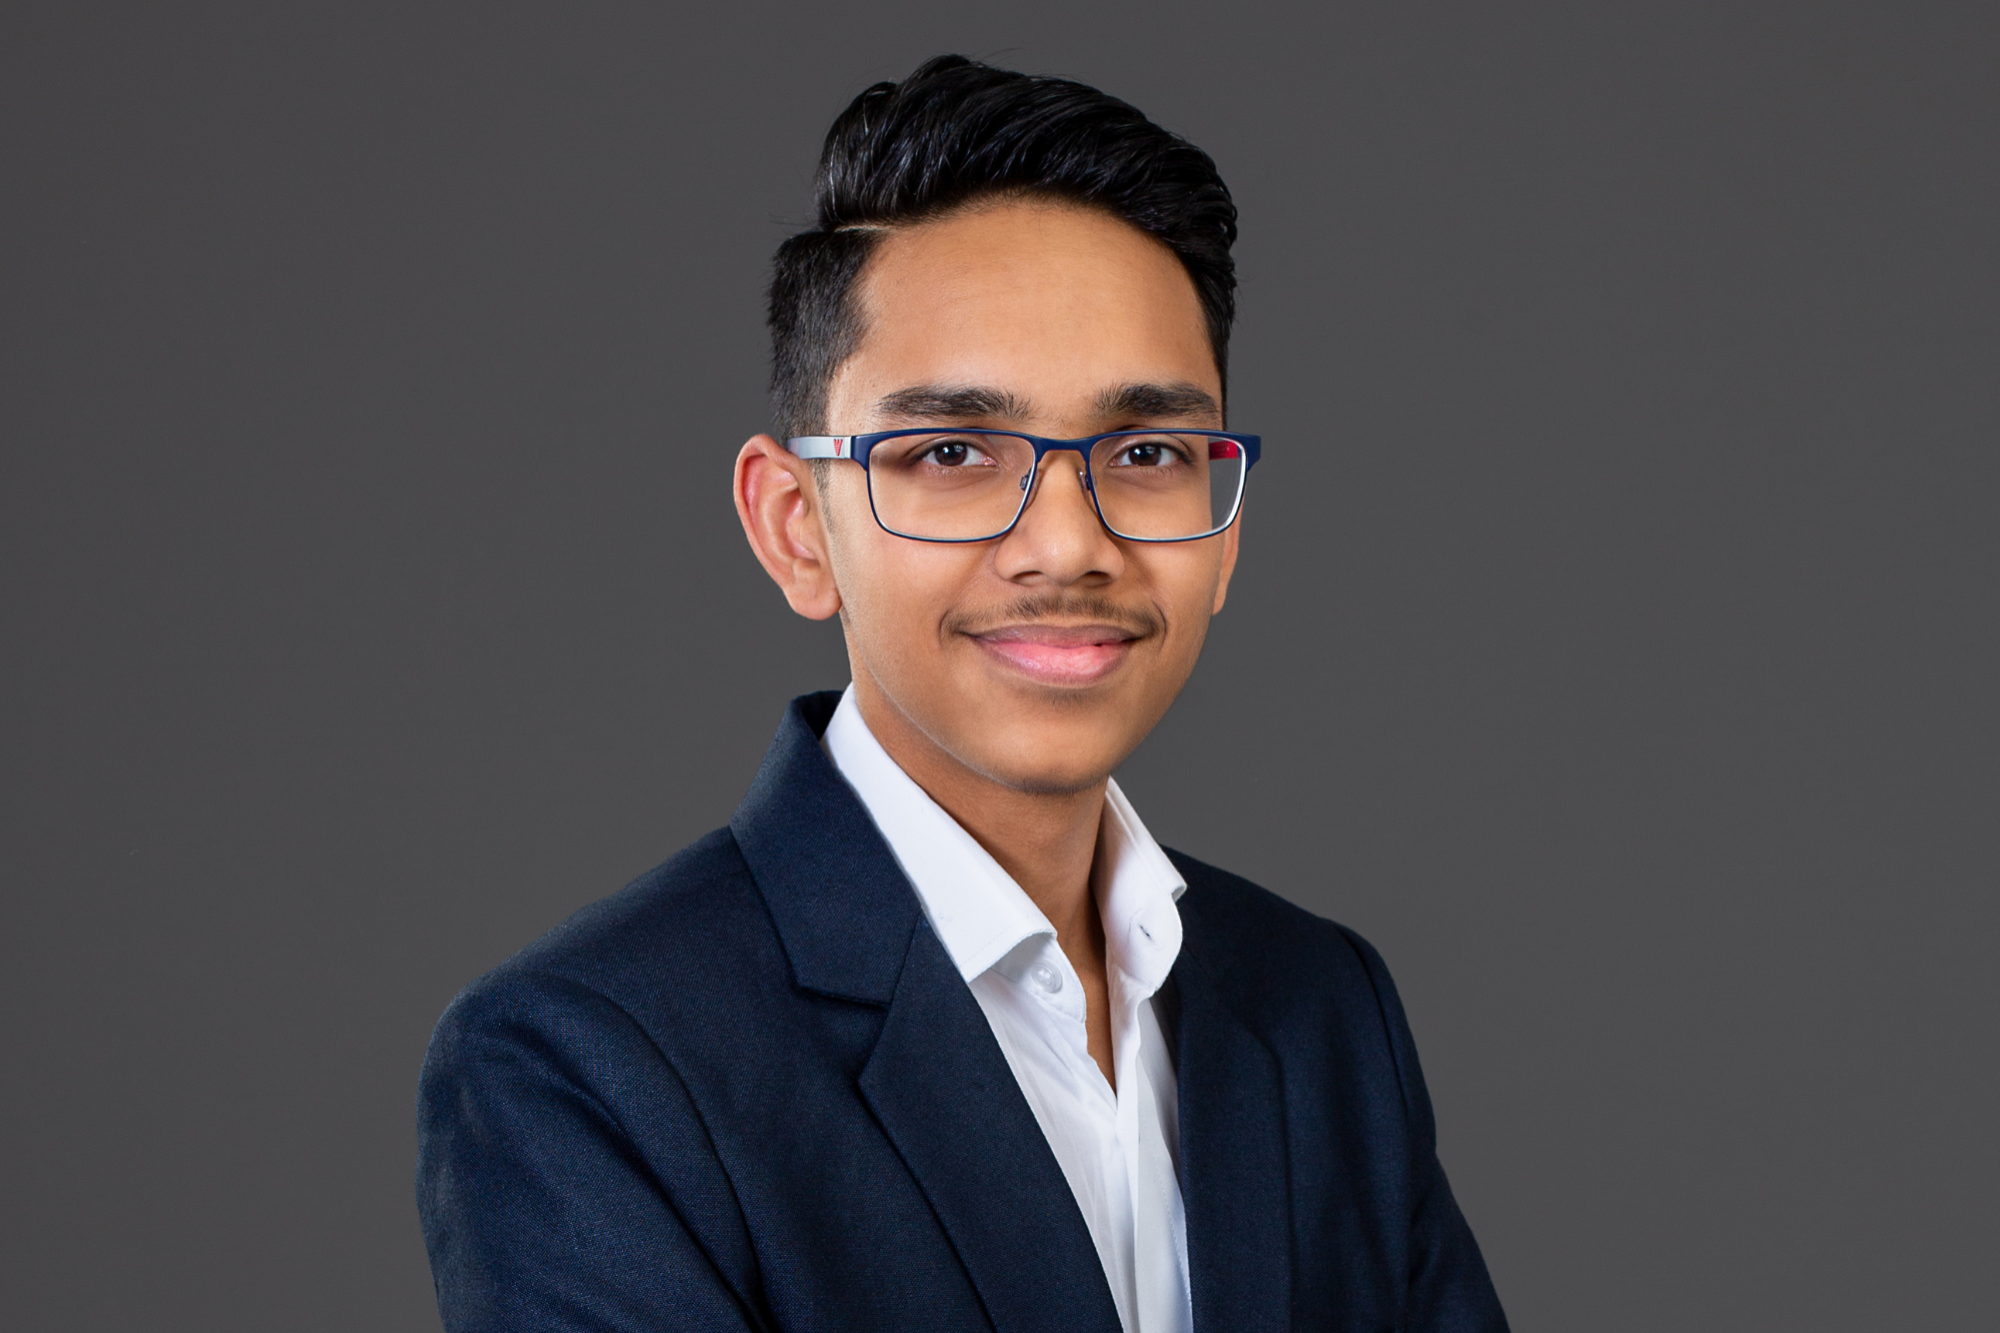 16-Year-Old Tejas Ravishankar Is Hoping To Harness (And Celebrate) The Magic Of Coding Through His Tech Startup, Dimension